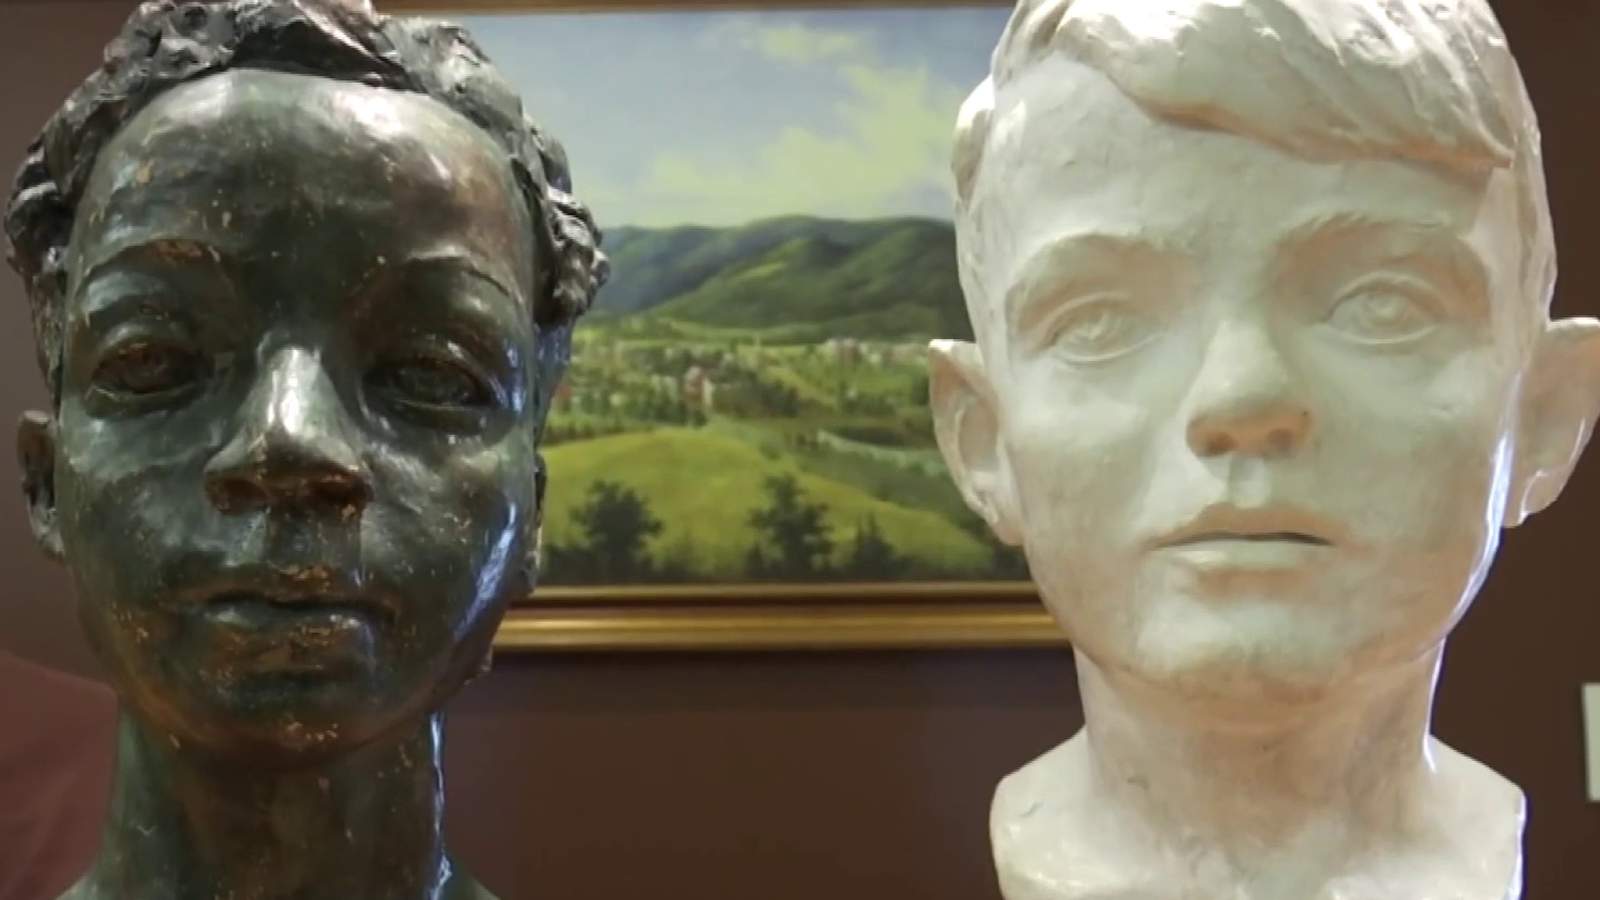 Two museums host discussion to help parents talk to kids about racial issues